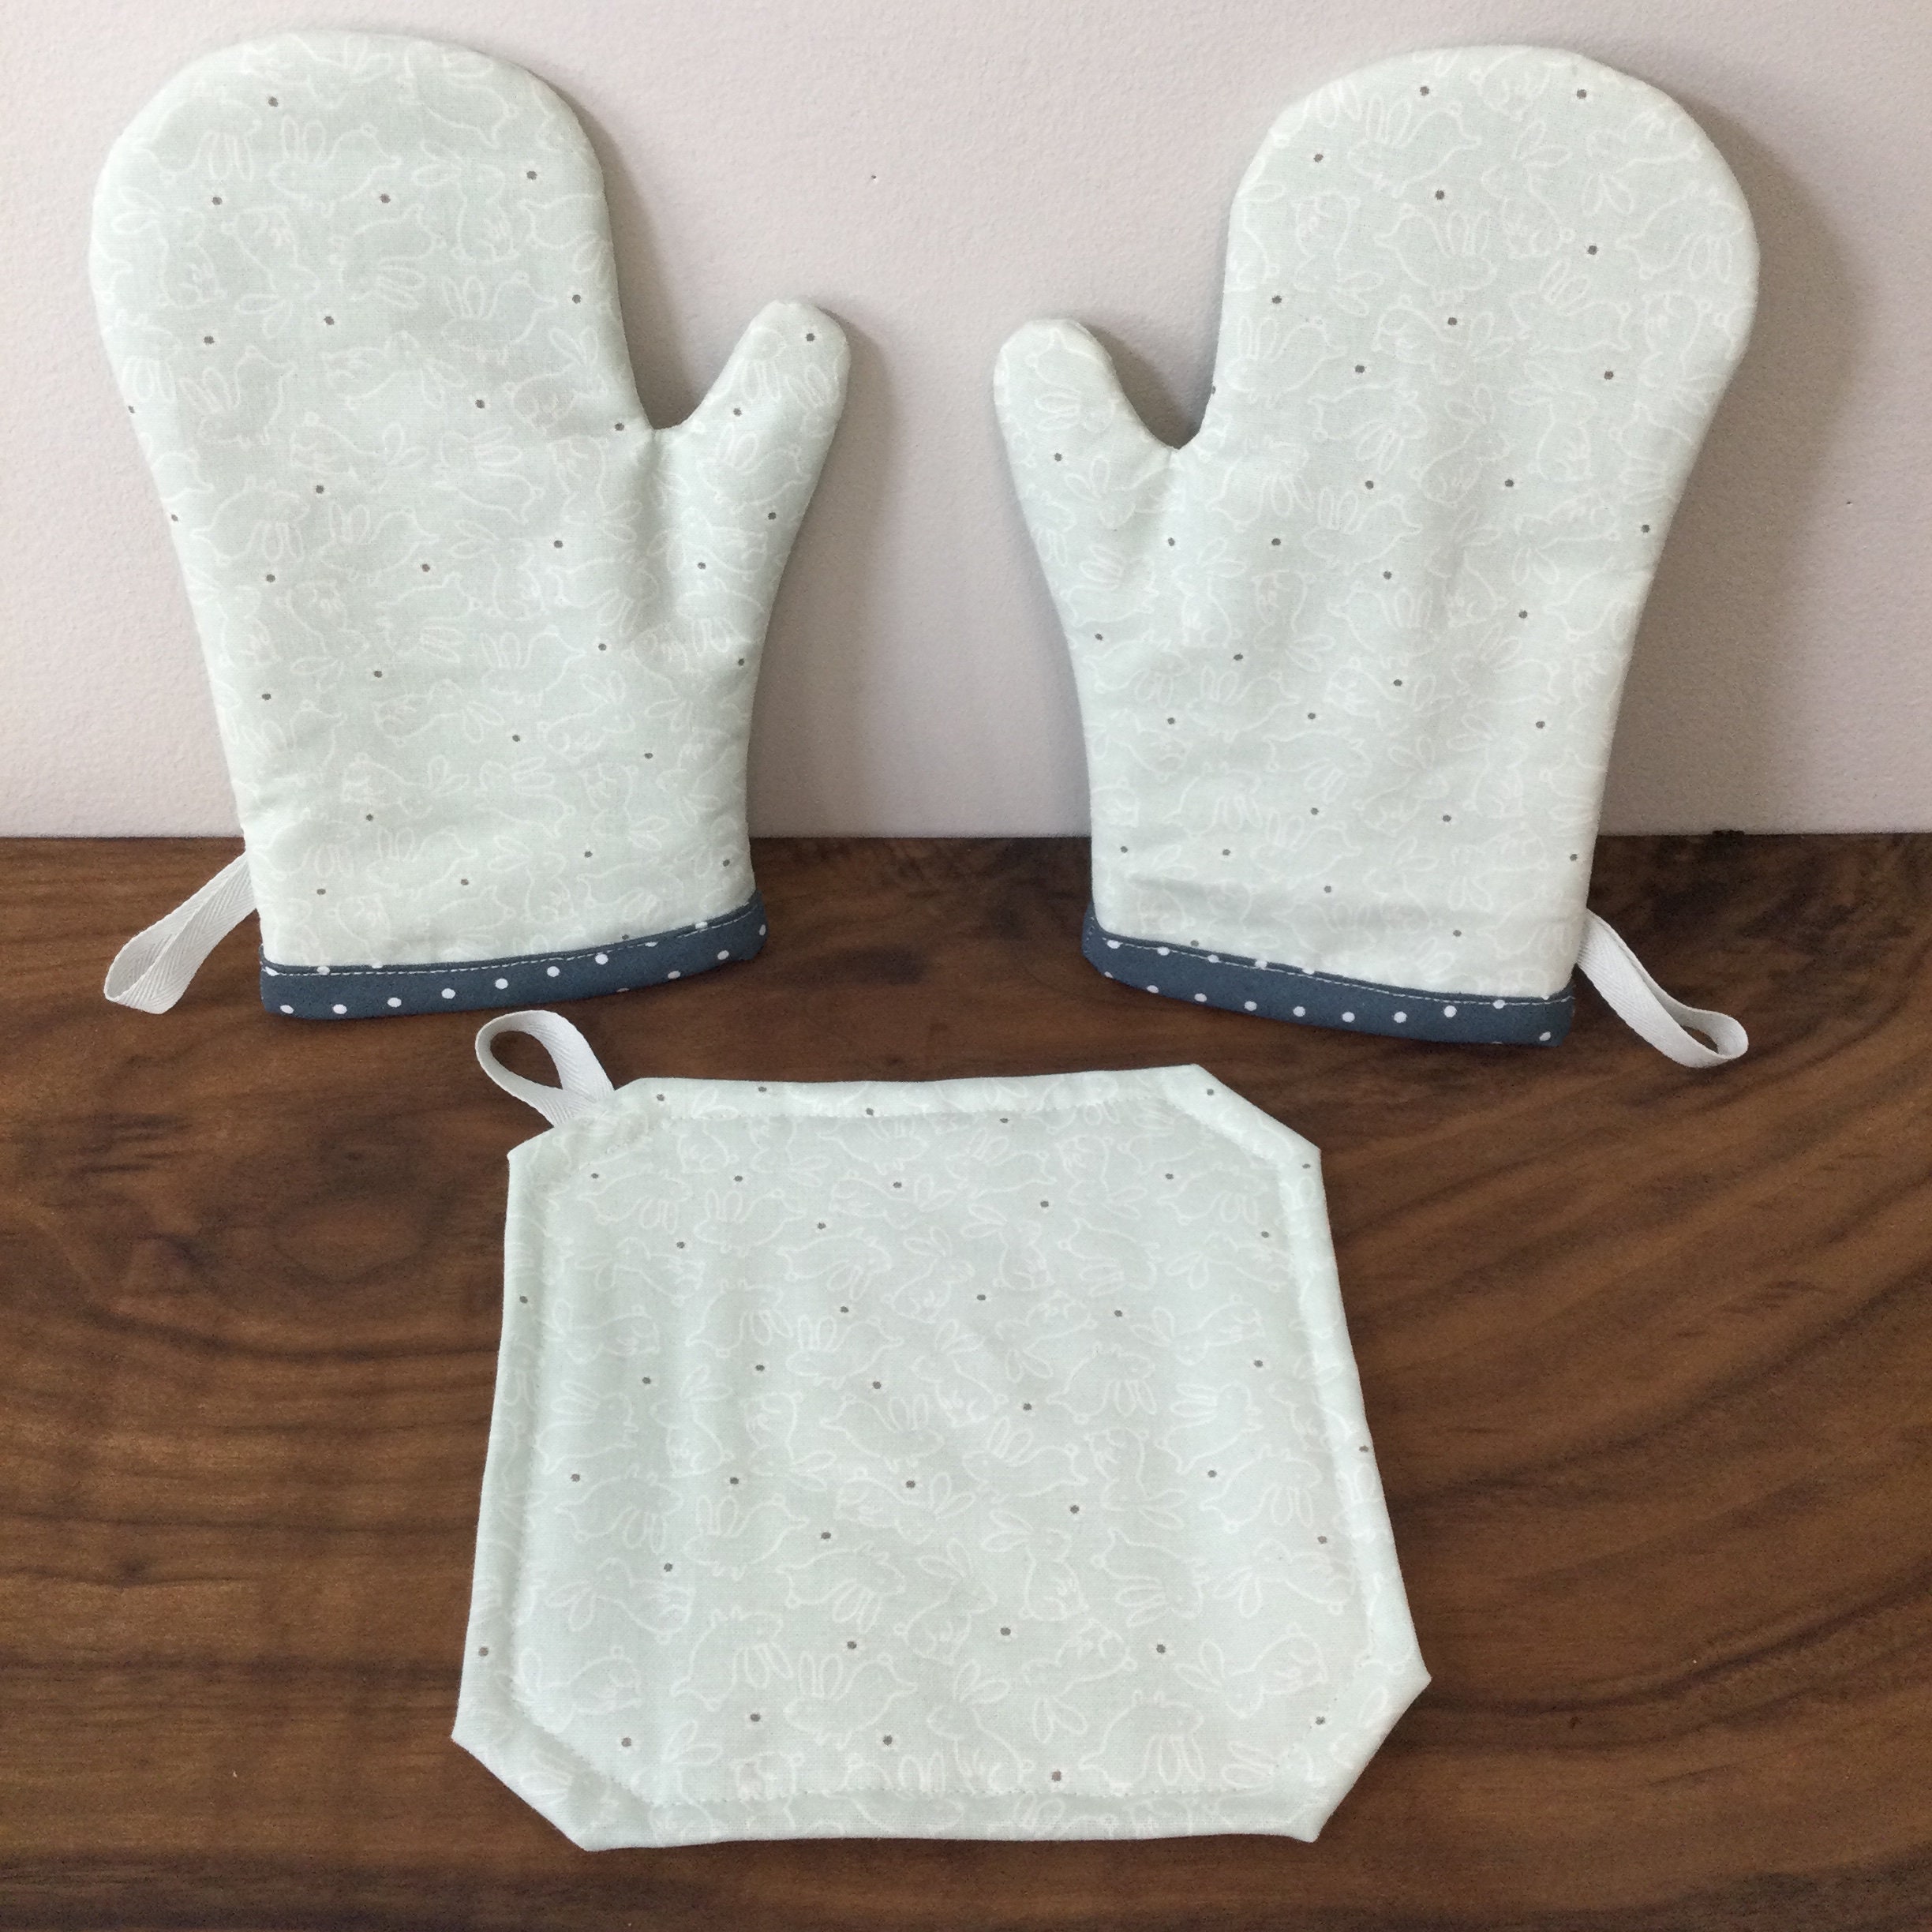 Here are the oven mitts that finally helped me get my kid cooking